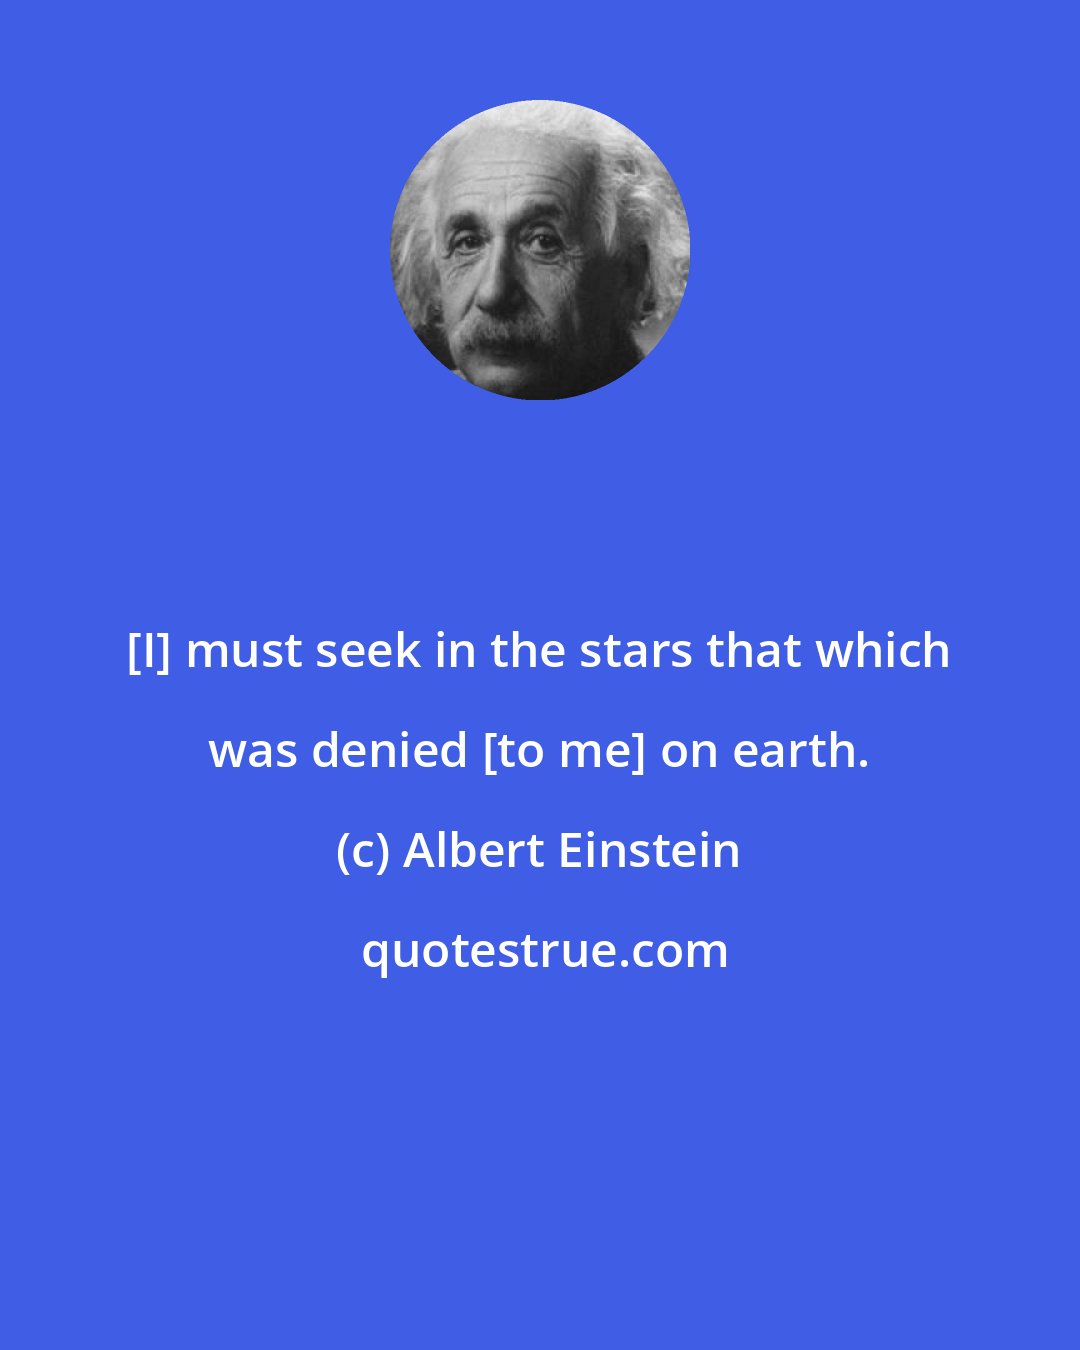 Albert Einstein: [I] must seek in the stars that which was denied [to me] on earth.